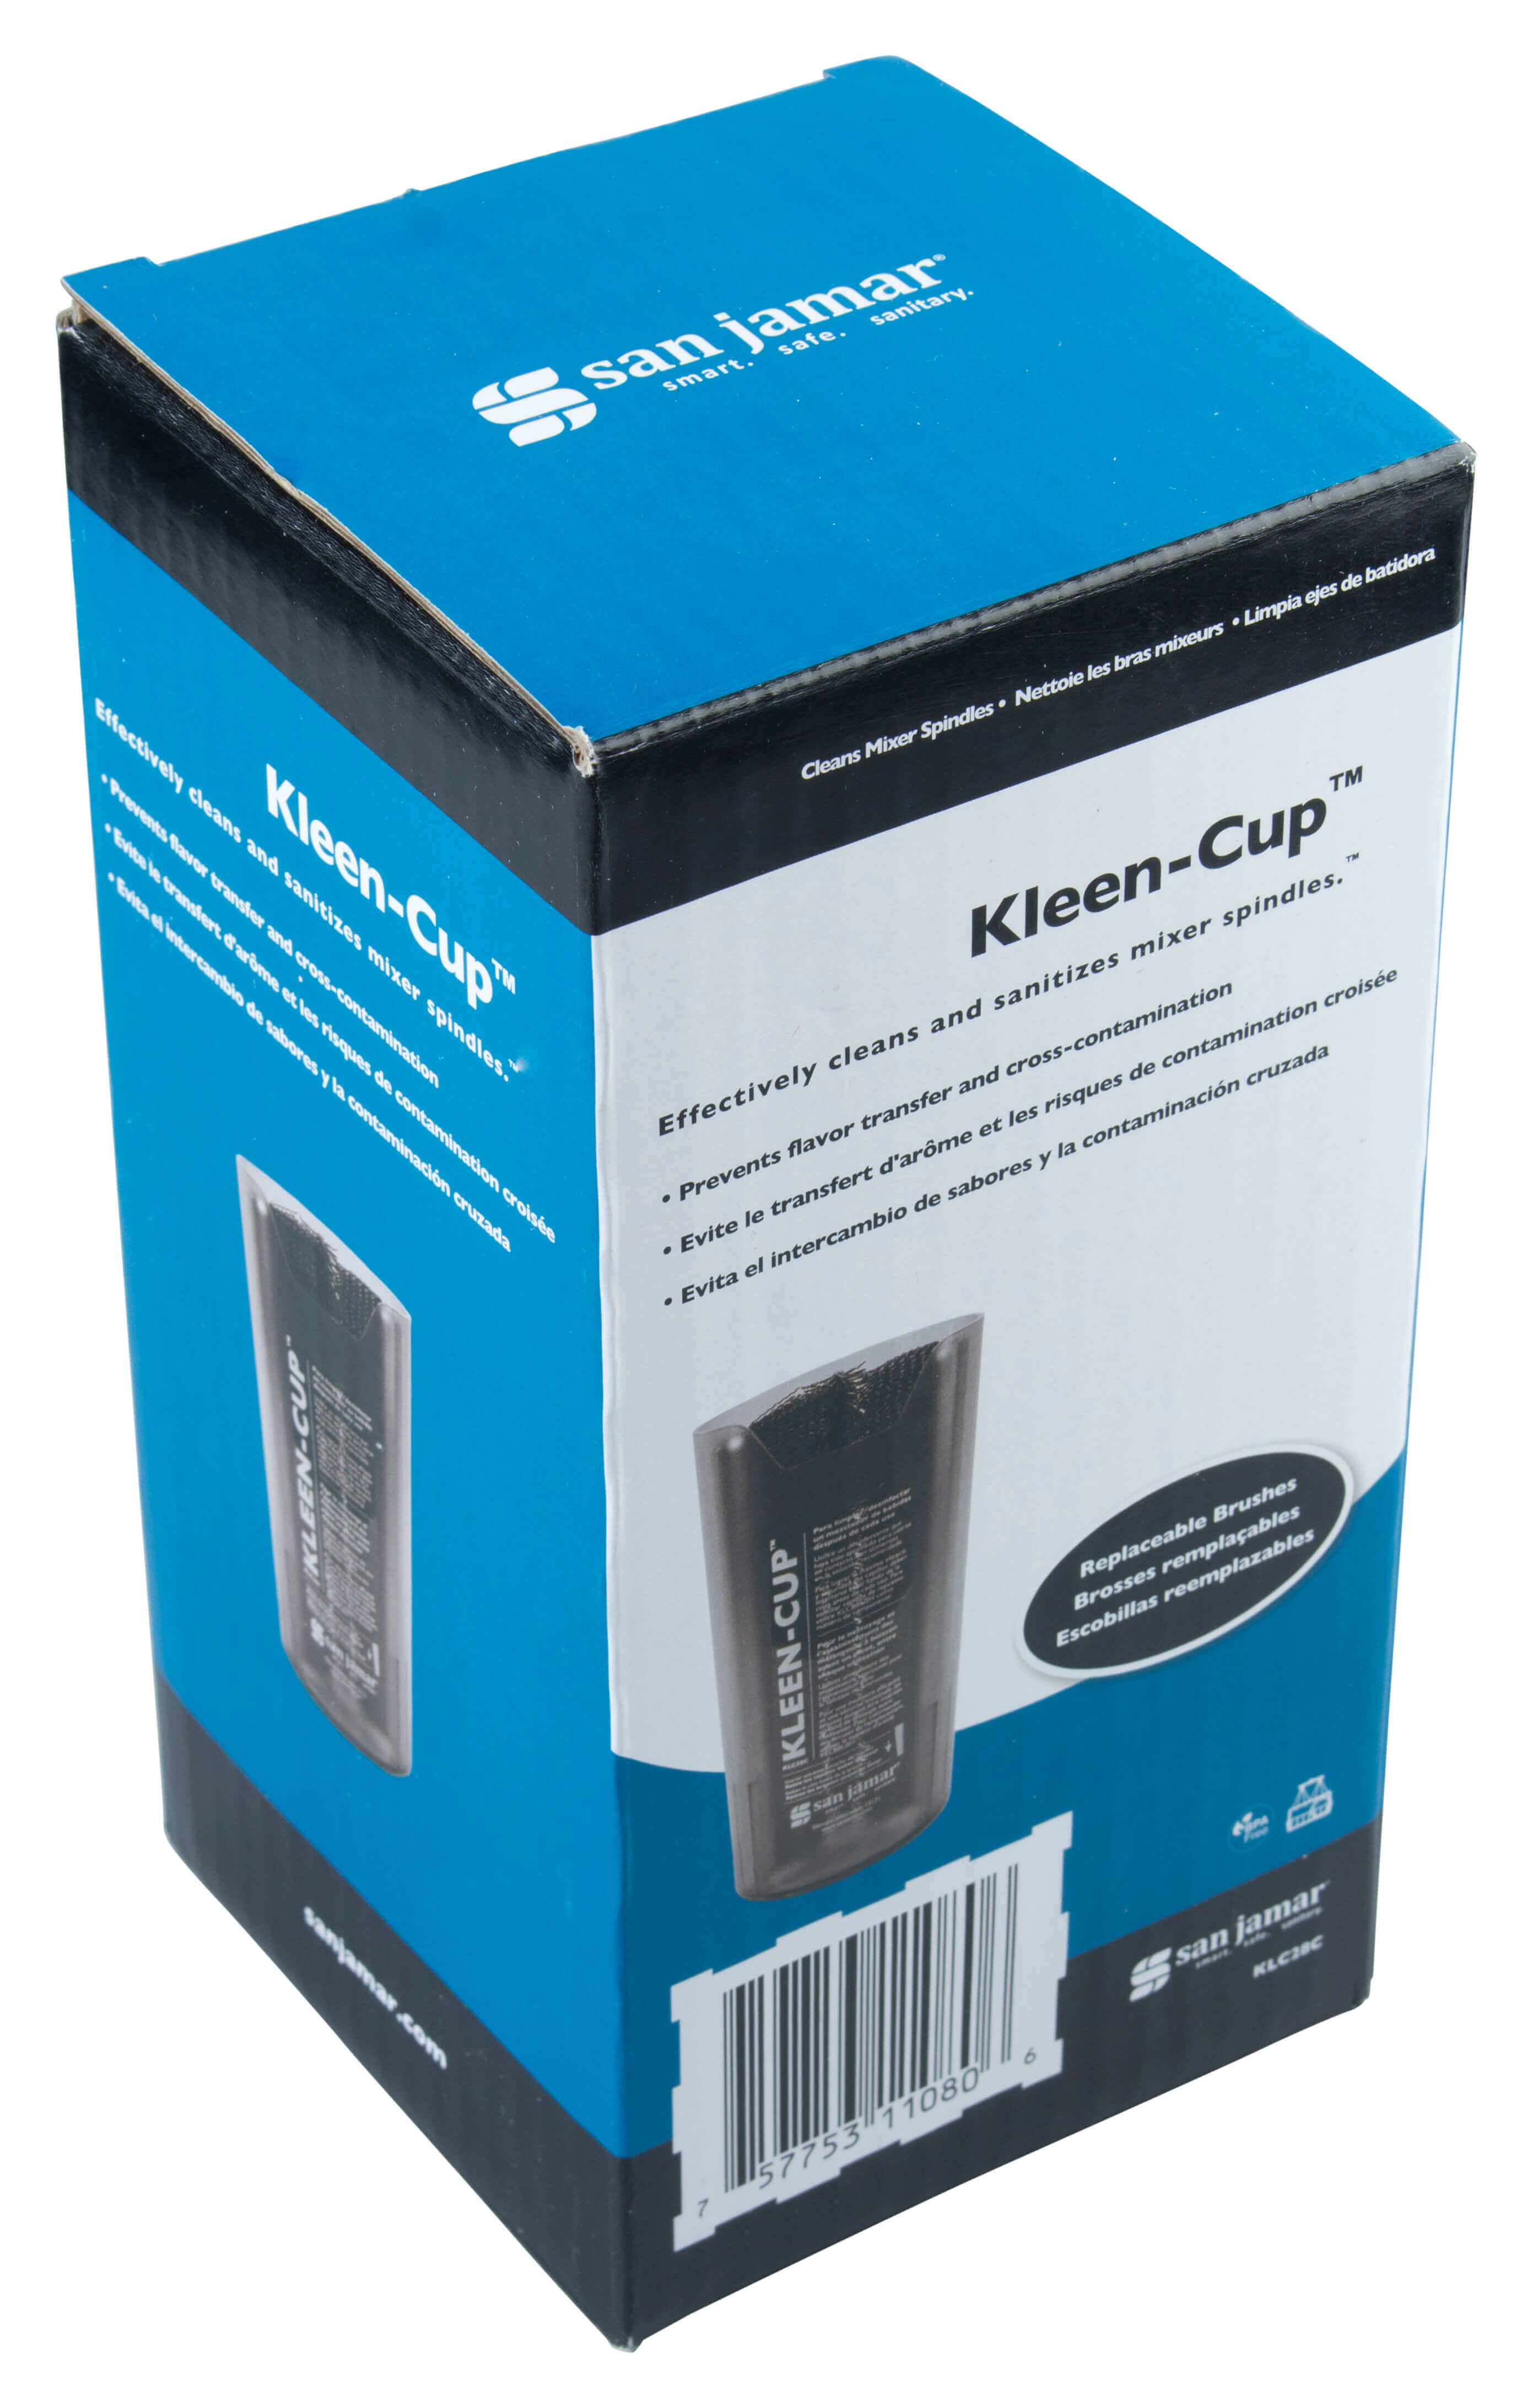 Kleen-Cup spindle cleaner and sanitizer